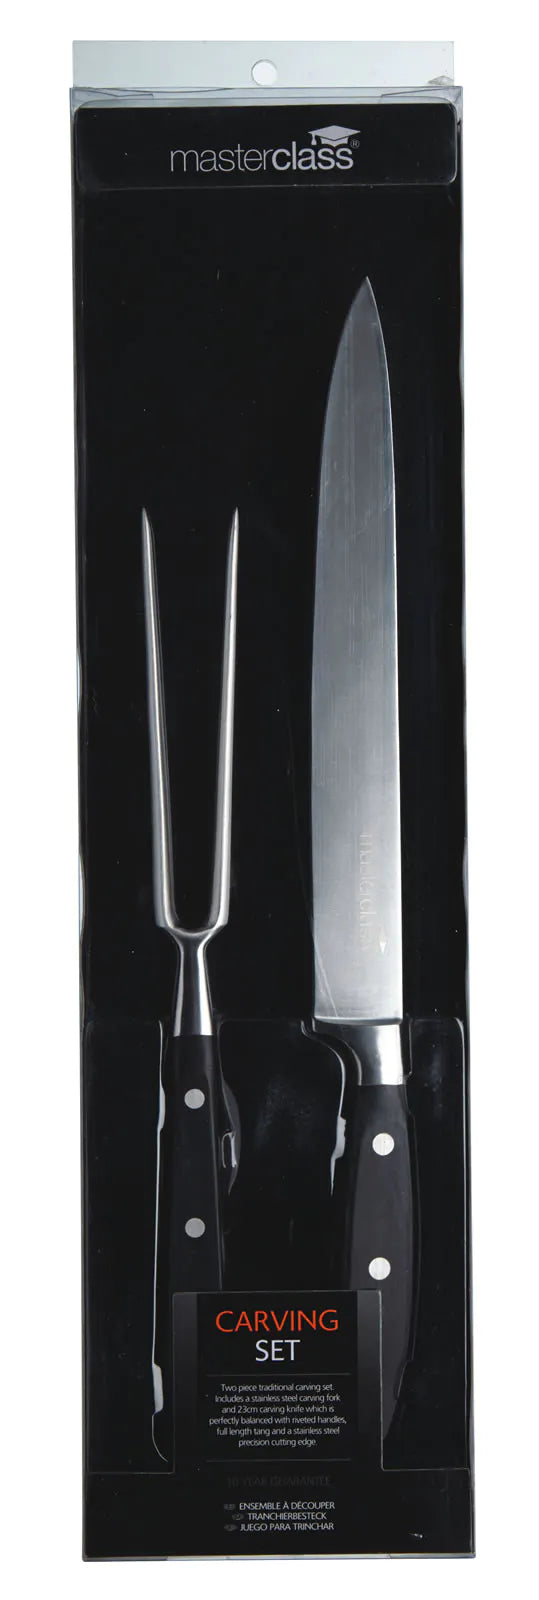 Masterclass Carving Knife and Fork Set